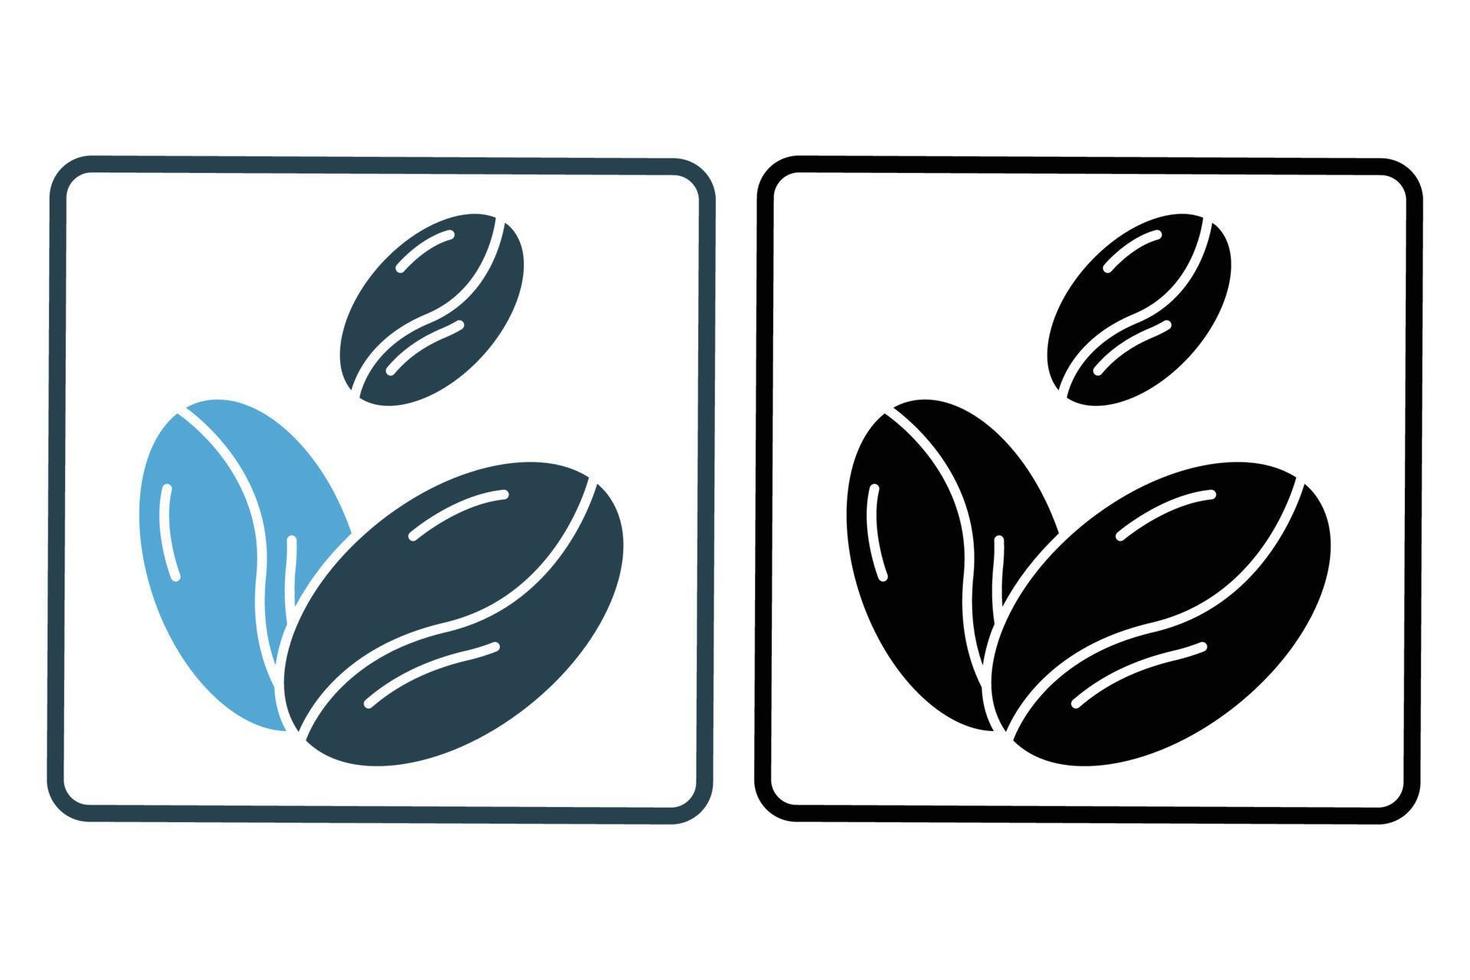 Coffee beans icon illustration. icon related to coffee element. Solid icon style. Simple vector design editable